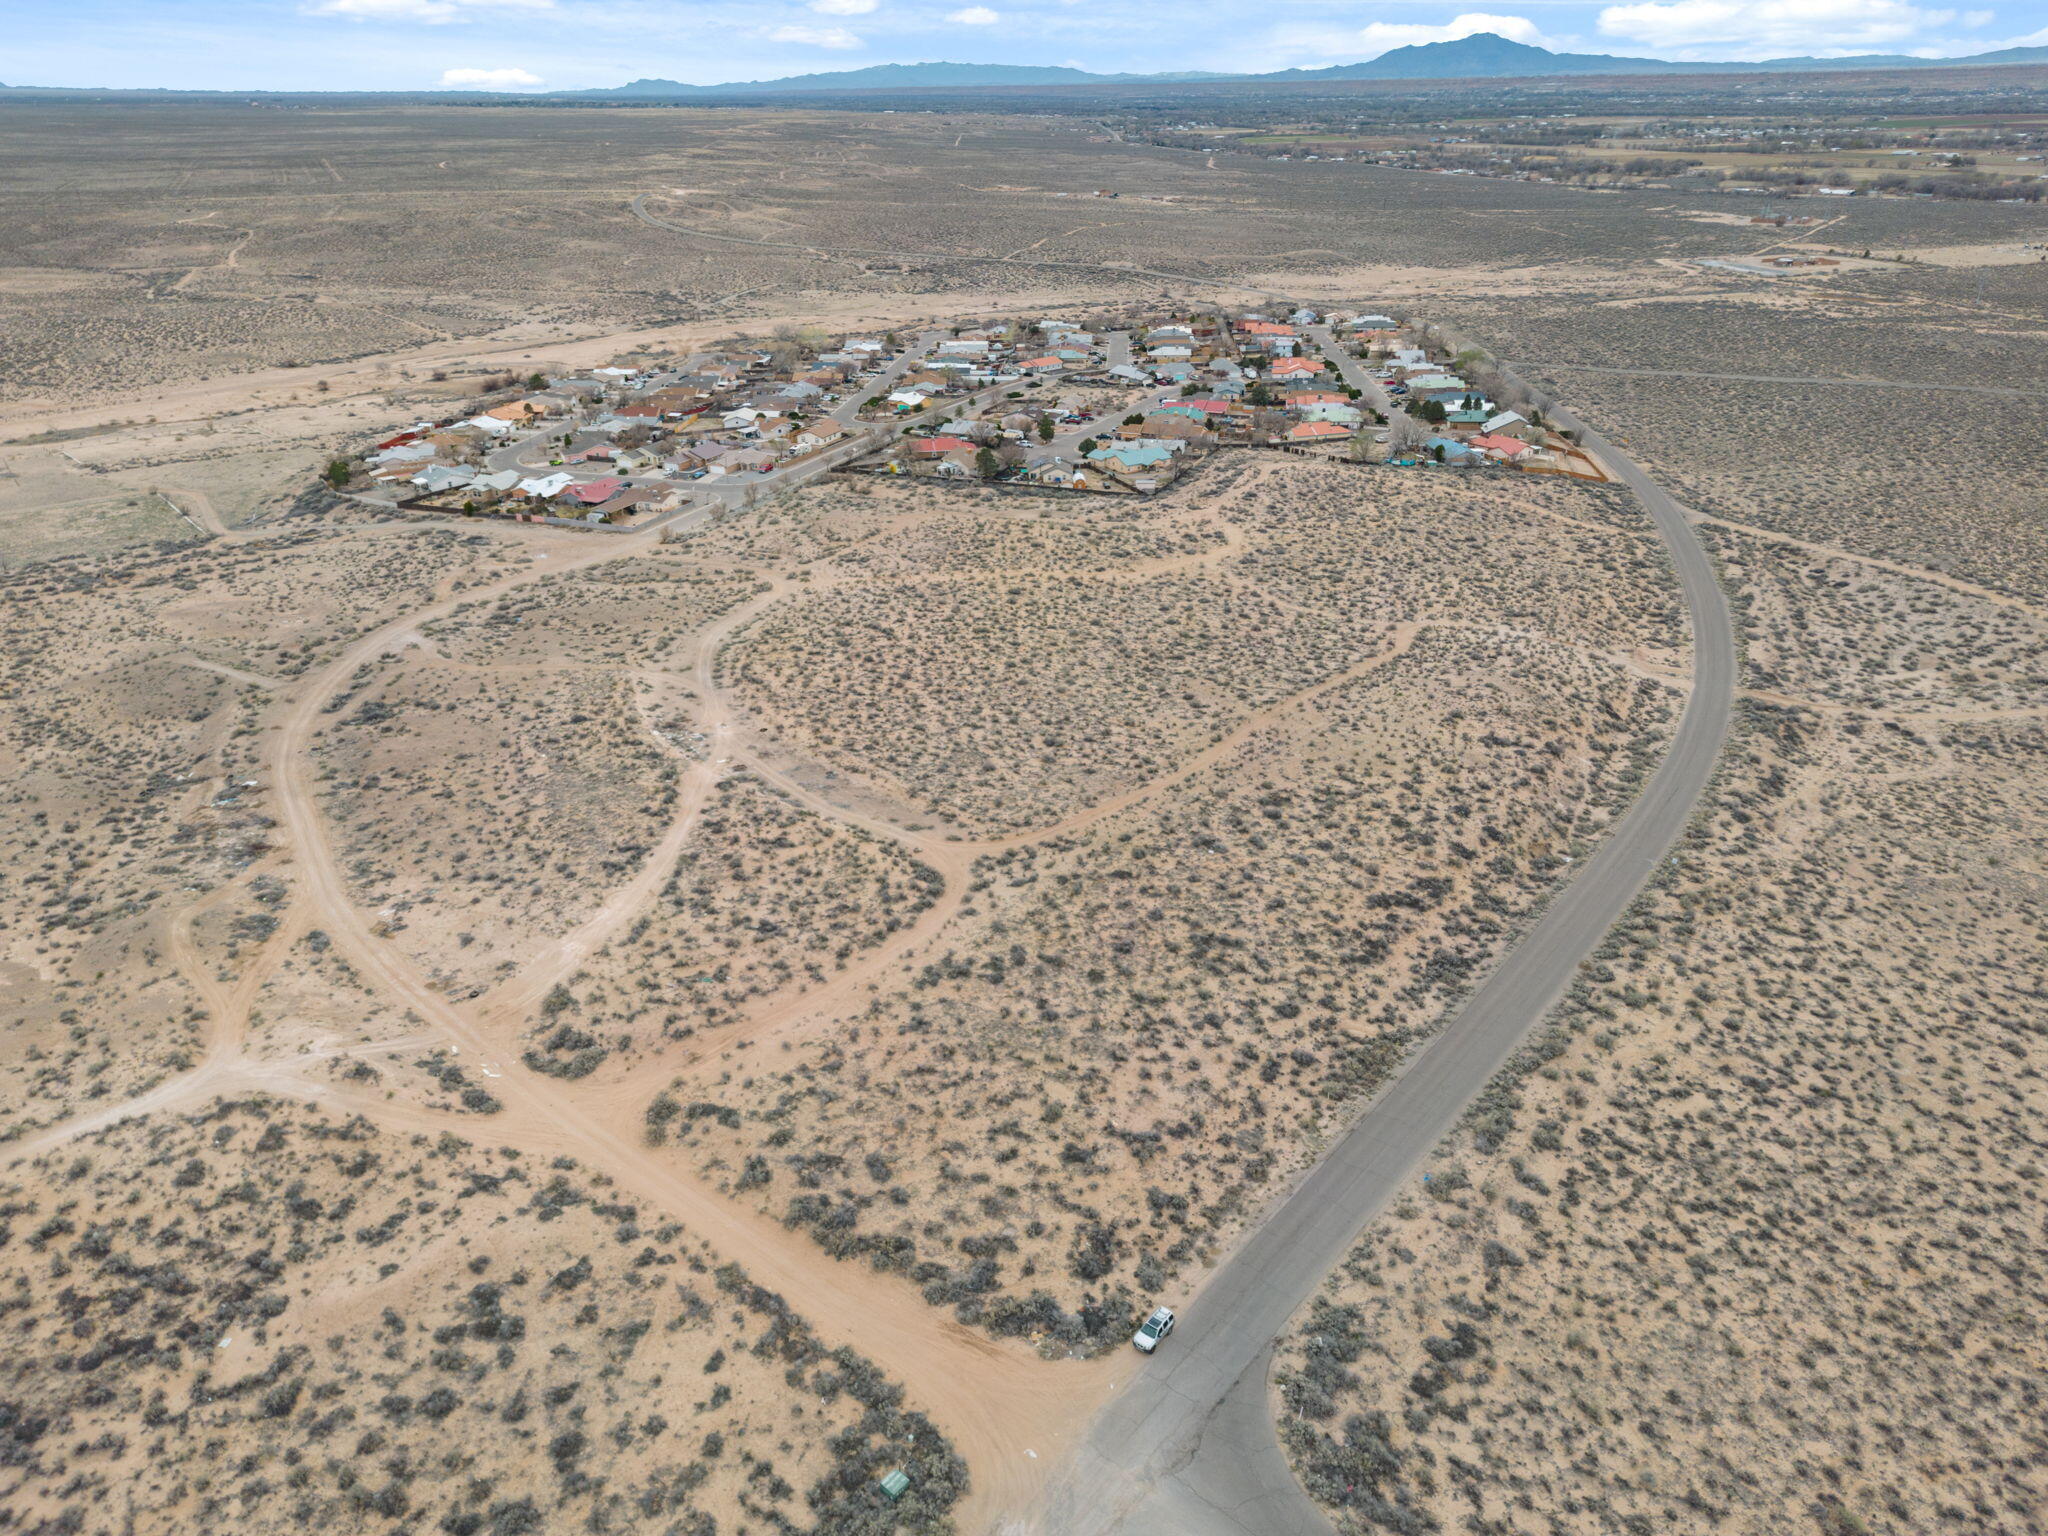 Tbd Chacon Boulevard, Los Lunas, New Mexico 87031, ,Land,For Sale,Tbd Chacon Boulevard,1058374